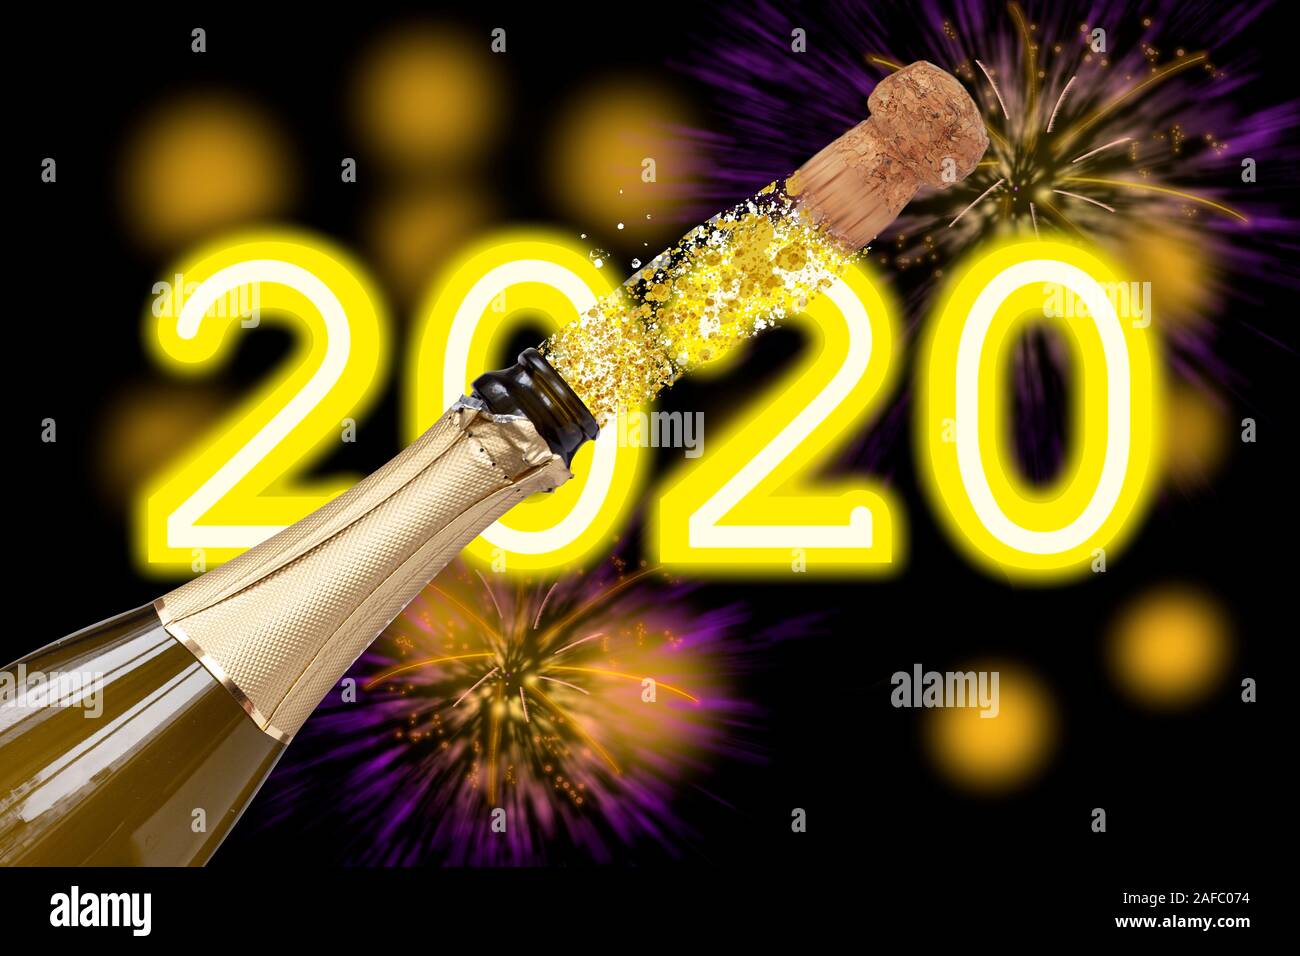 Cork popping out from bottle with champagne wine at party on black bokeh background with fireworks and 2020 written in neon letters. New Year evening Stock Photo